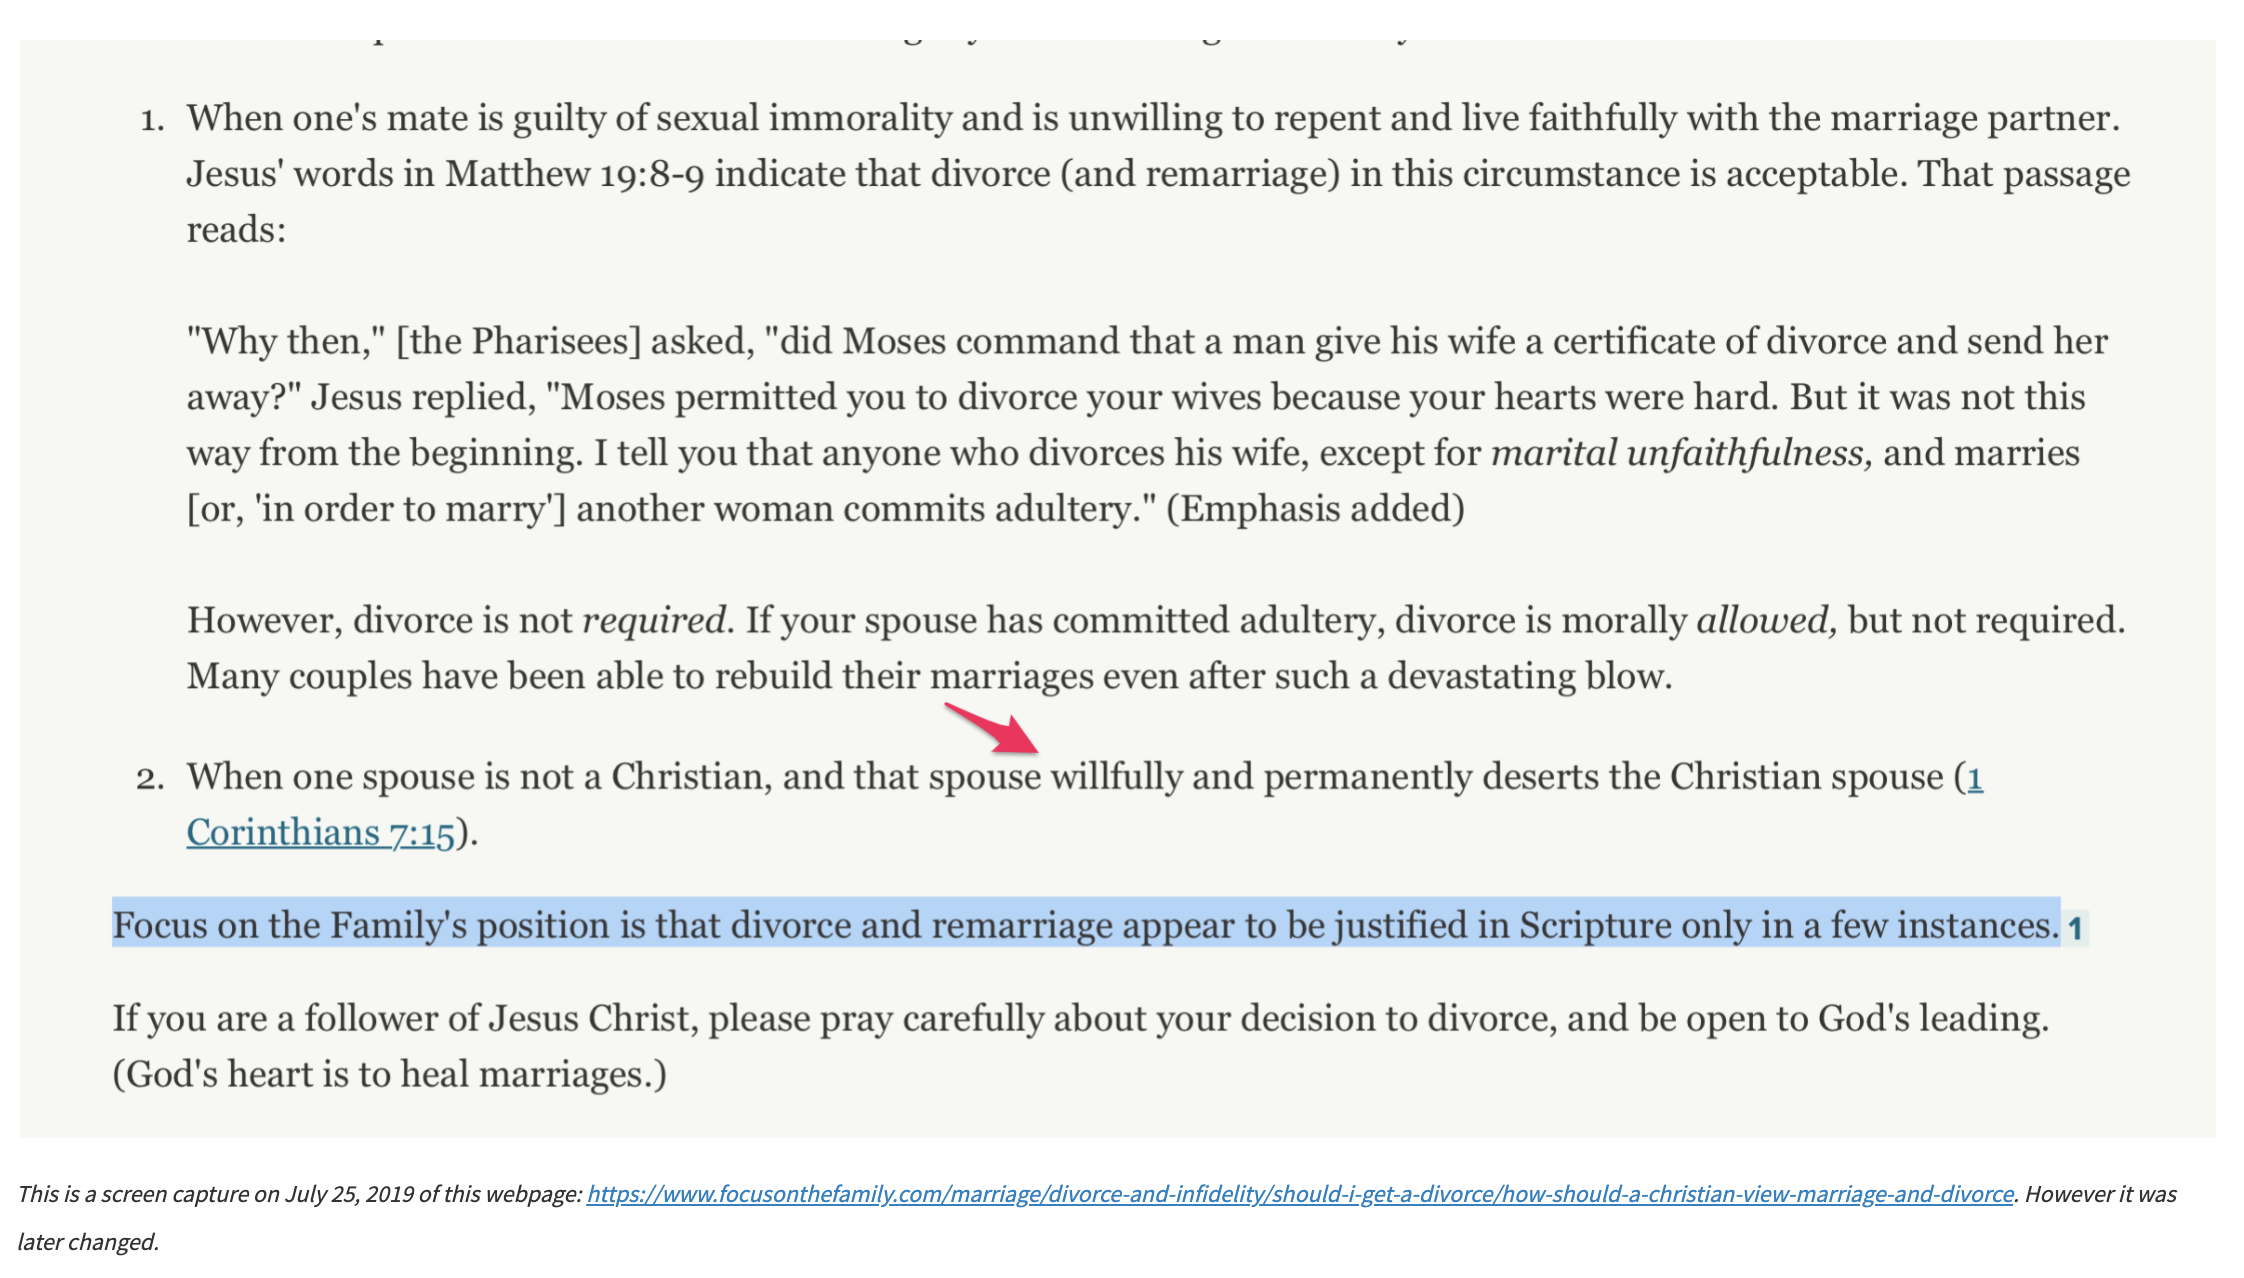 This is a screen capture on July 25, 2019 of this webpage: https://www.focusonthefamily.com/marriage/divorce-and-infidelity/should-i-get-a-divorce/how-should-a-christian-view-marriage-and-divorce. However it was later changed. 